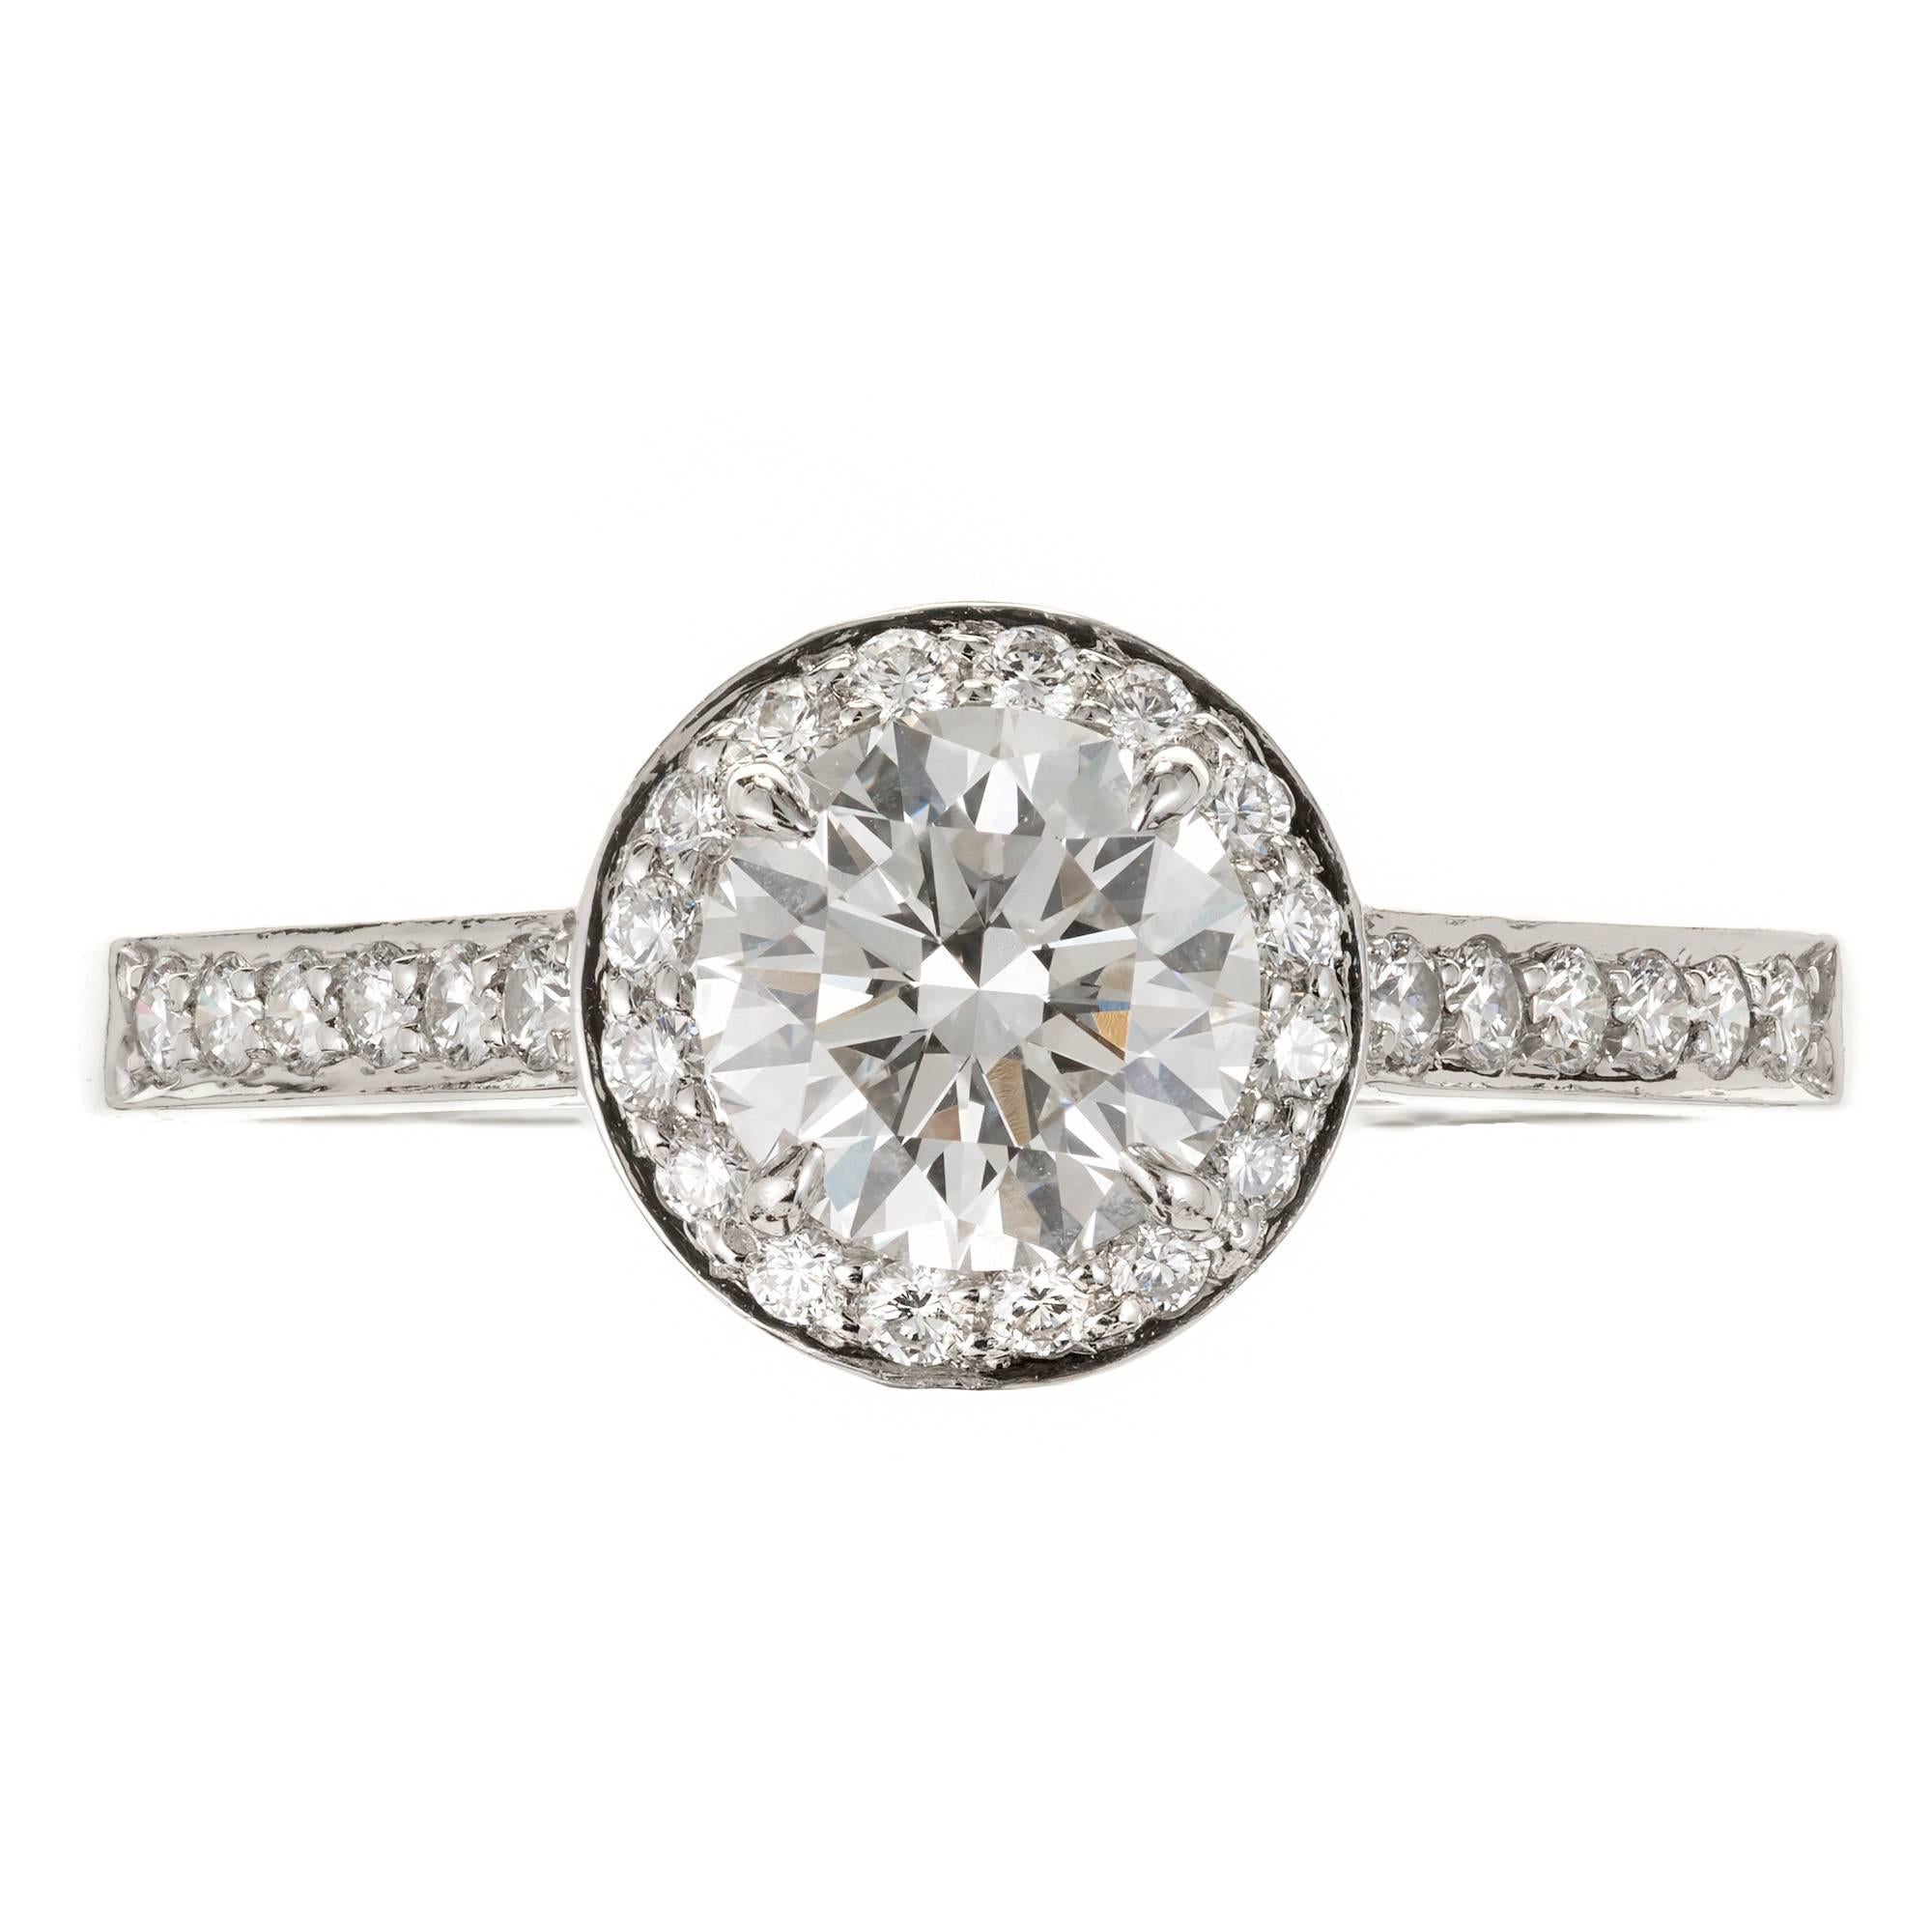 Authentic Tiffany & Co Diamond halo engagement ring. The center Diamond approx. total weight .76cts. with round accent diamonds in a platinum setting.

1 round Diamond, approx. total weight .76cts, H, I-F, Tiffany & Co L09130301 27316875
28 round